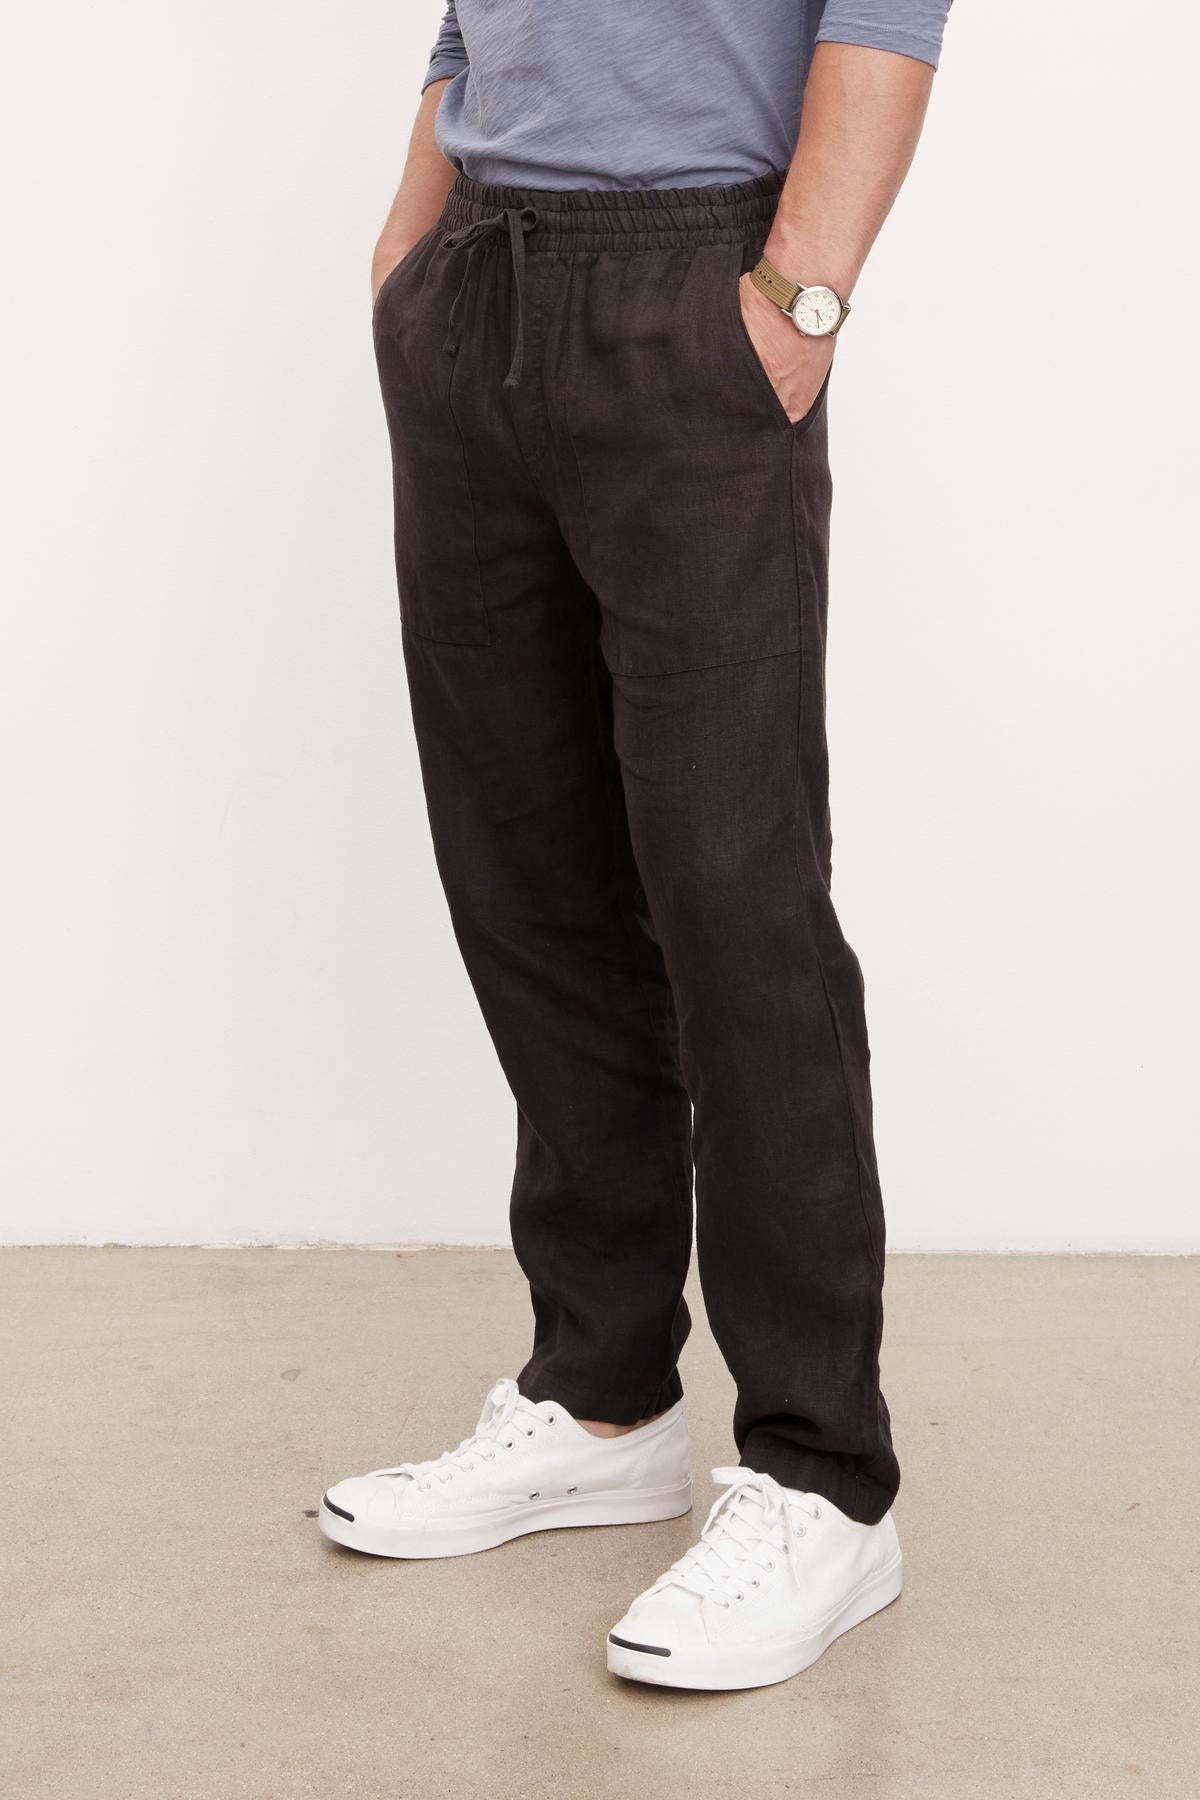 A person wearing Velvet by Graham & Spencer black Phelan linen pants and white shoes.-36009949495489